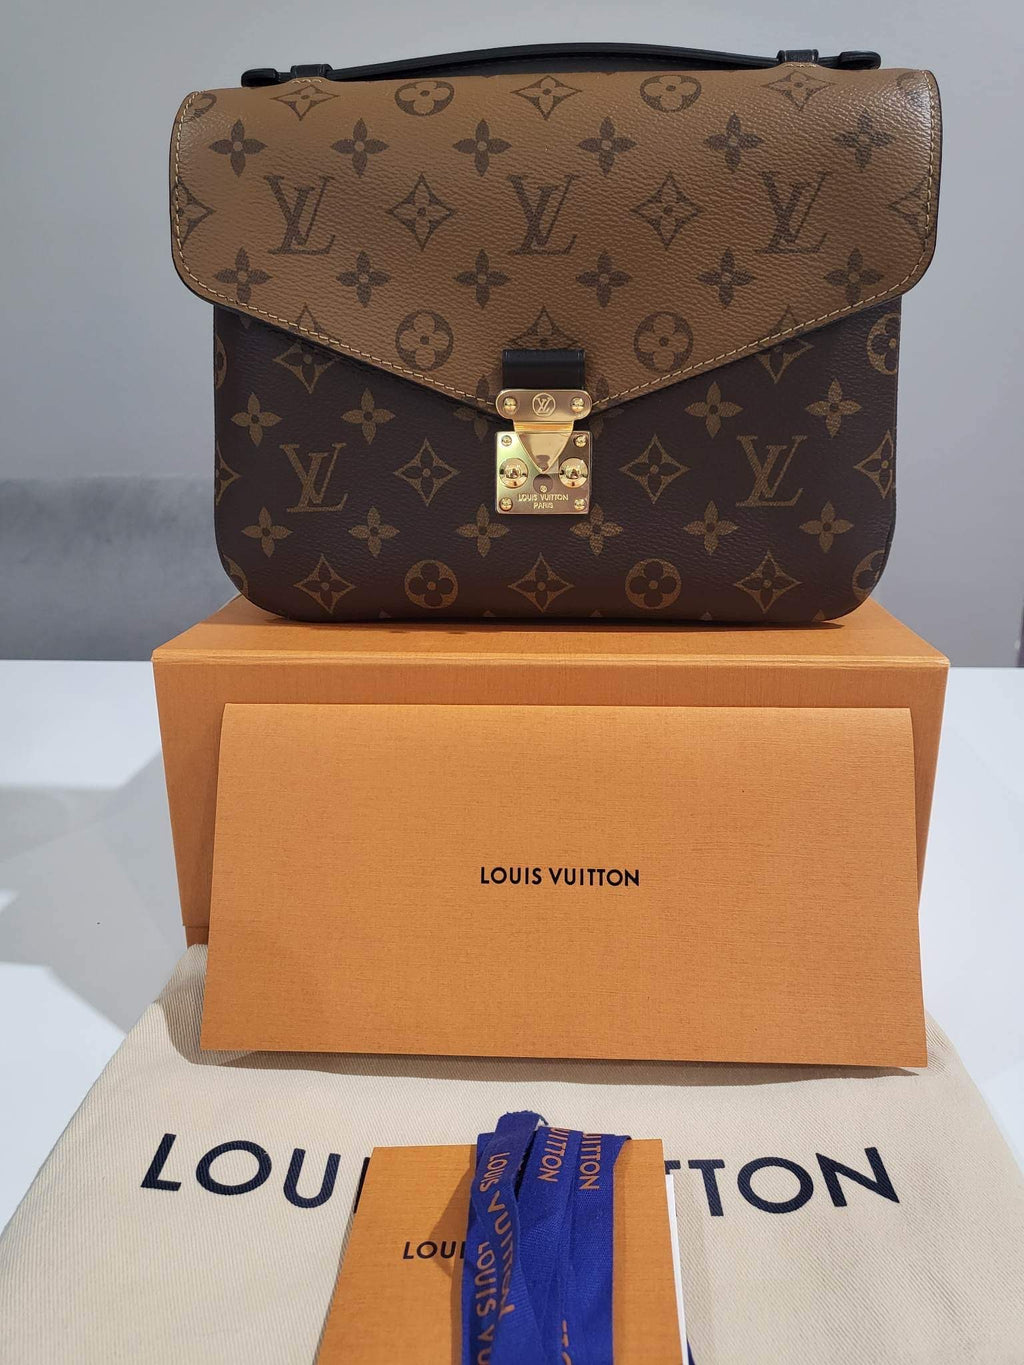 New Refurbished Louis Vuitton - The Prickly Pear Boutique